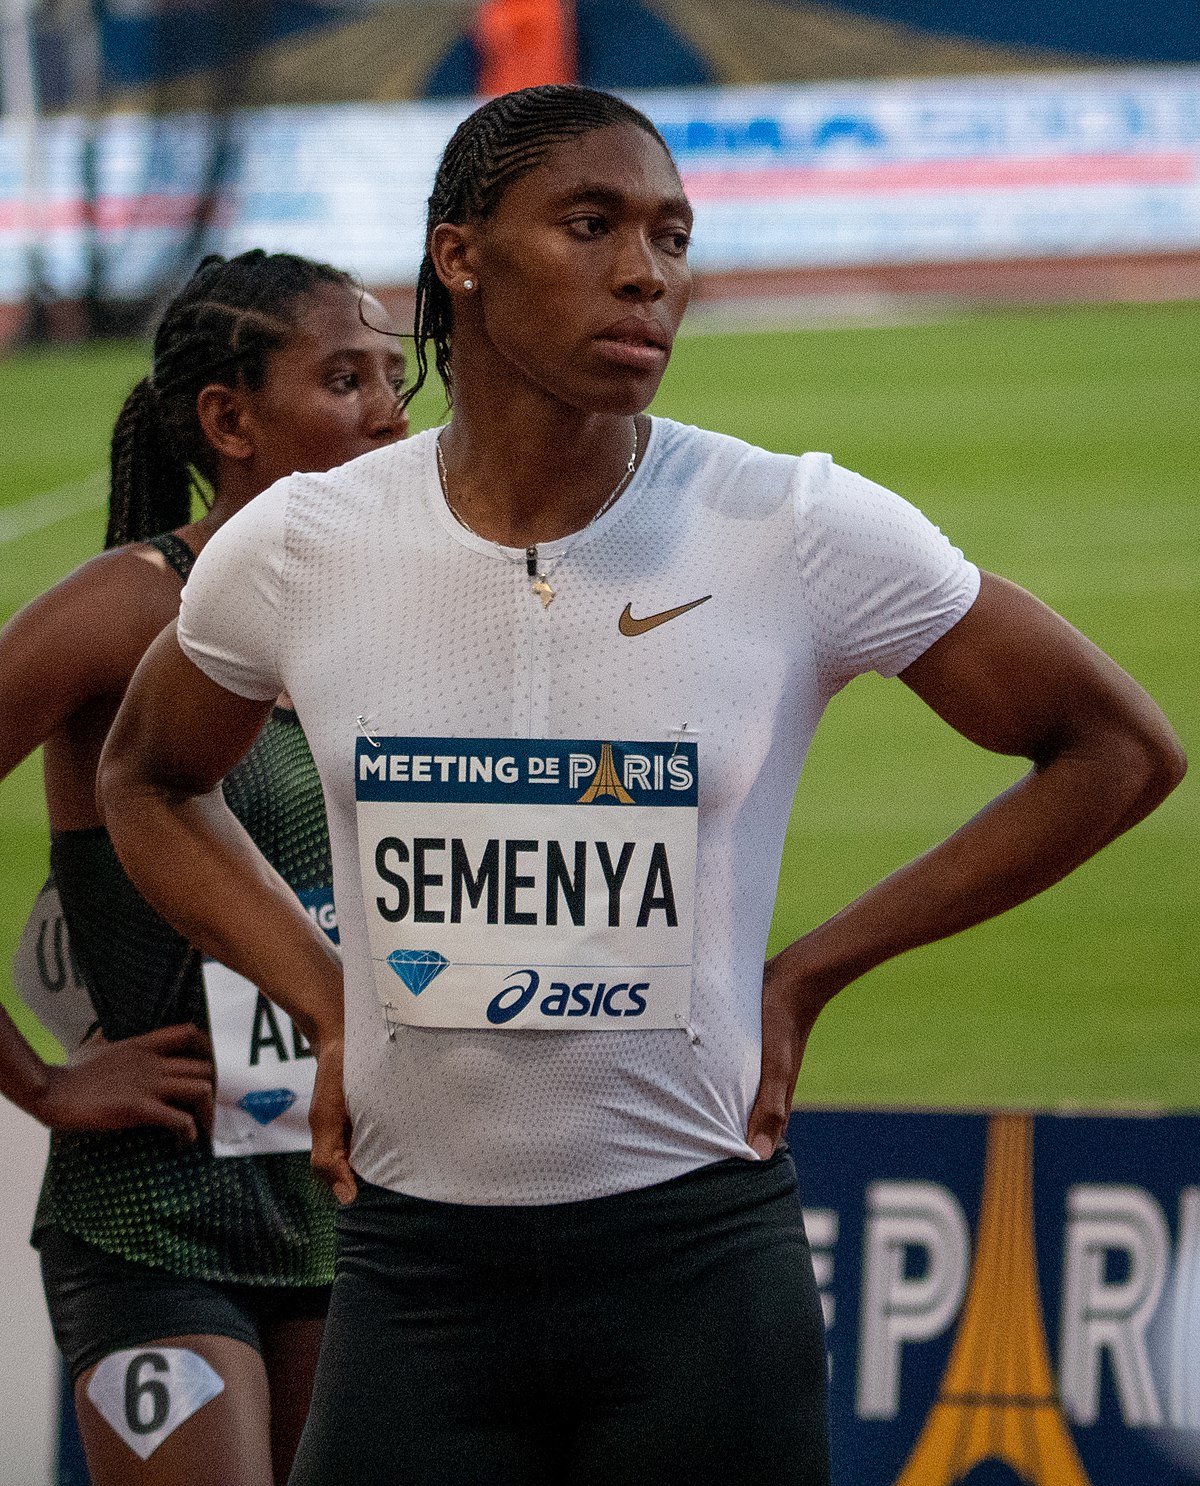 Mokgadi Caster Semenya OIB (born 7 January 1991) is a South African middle-distance runner and winner of two Olympic gold medals[4] and three 